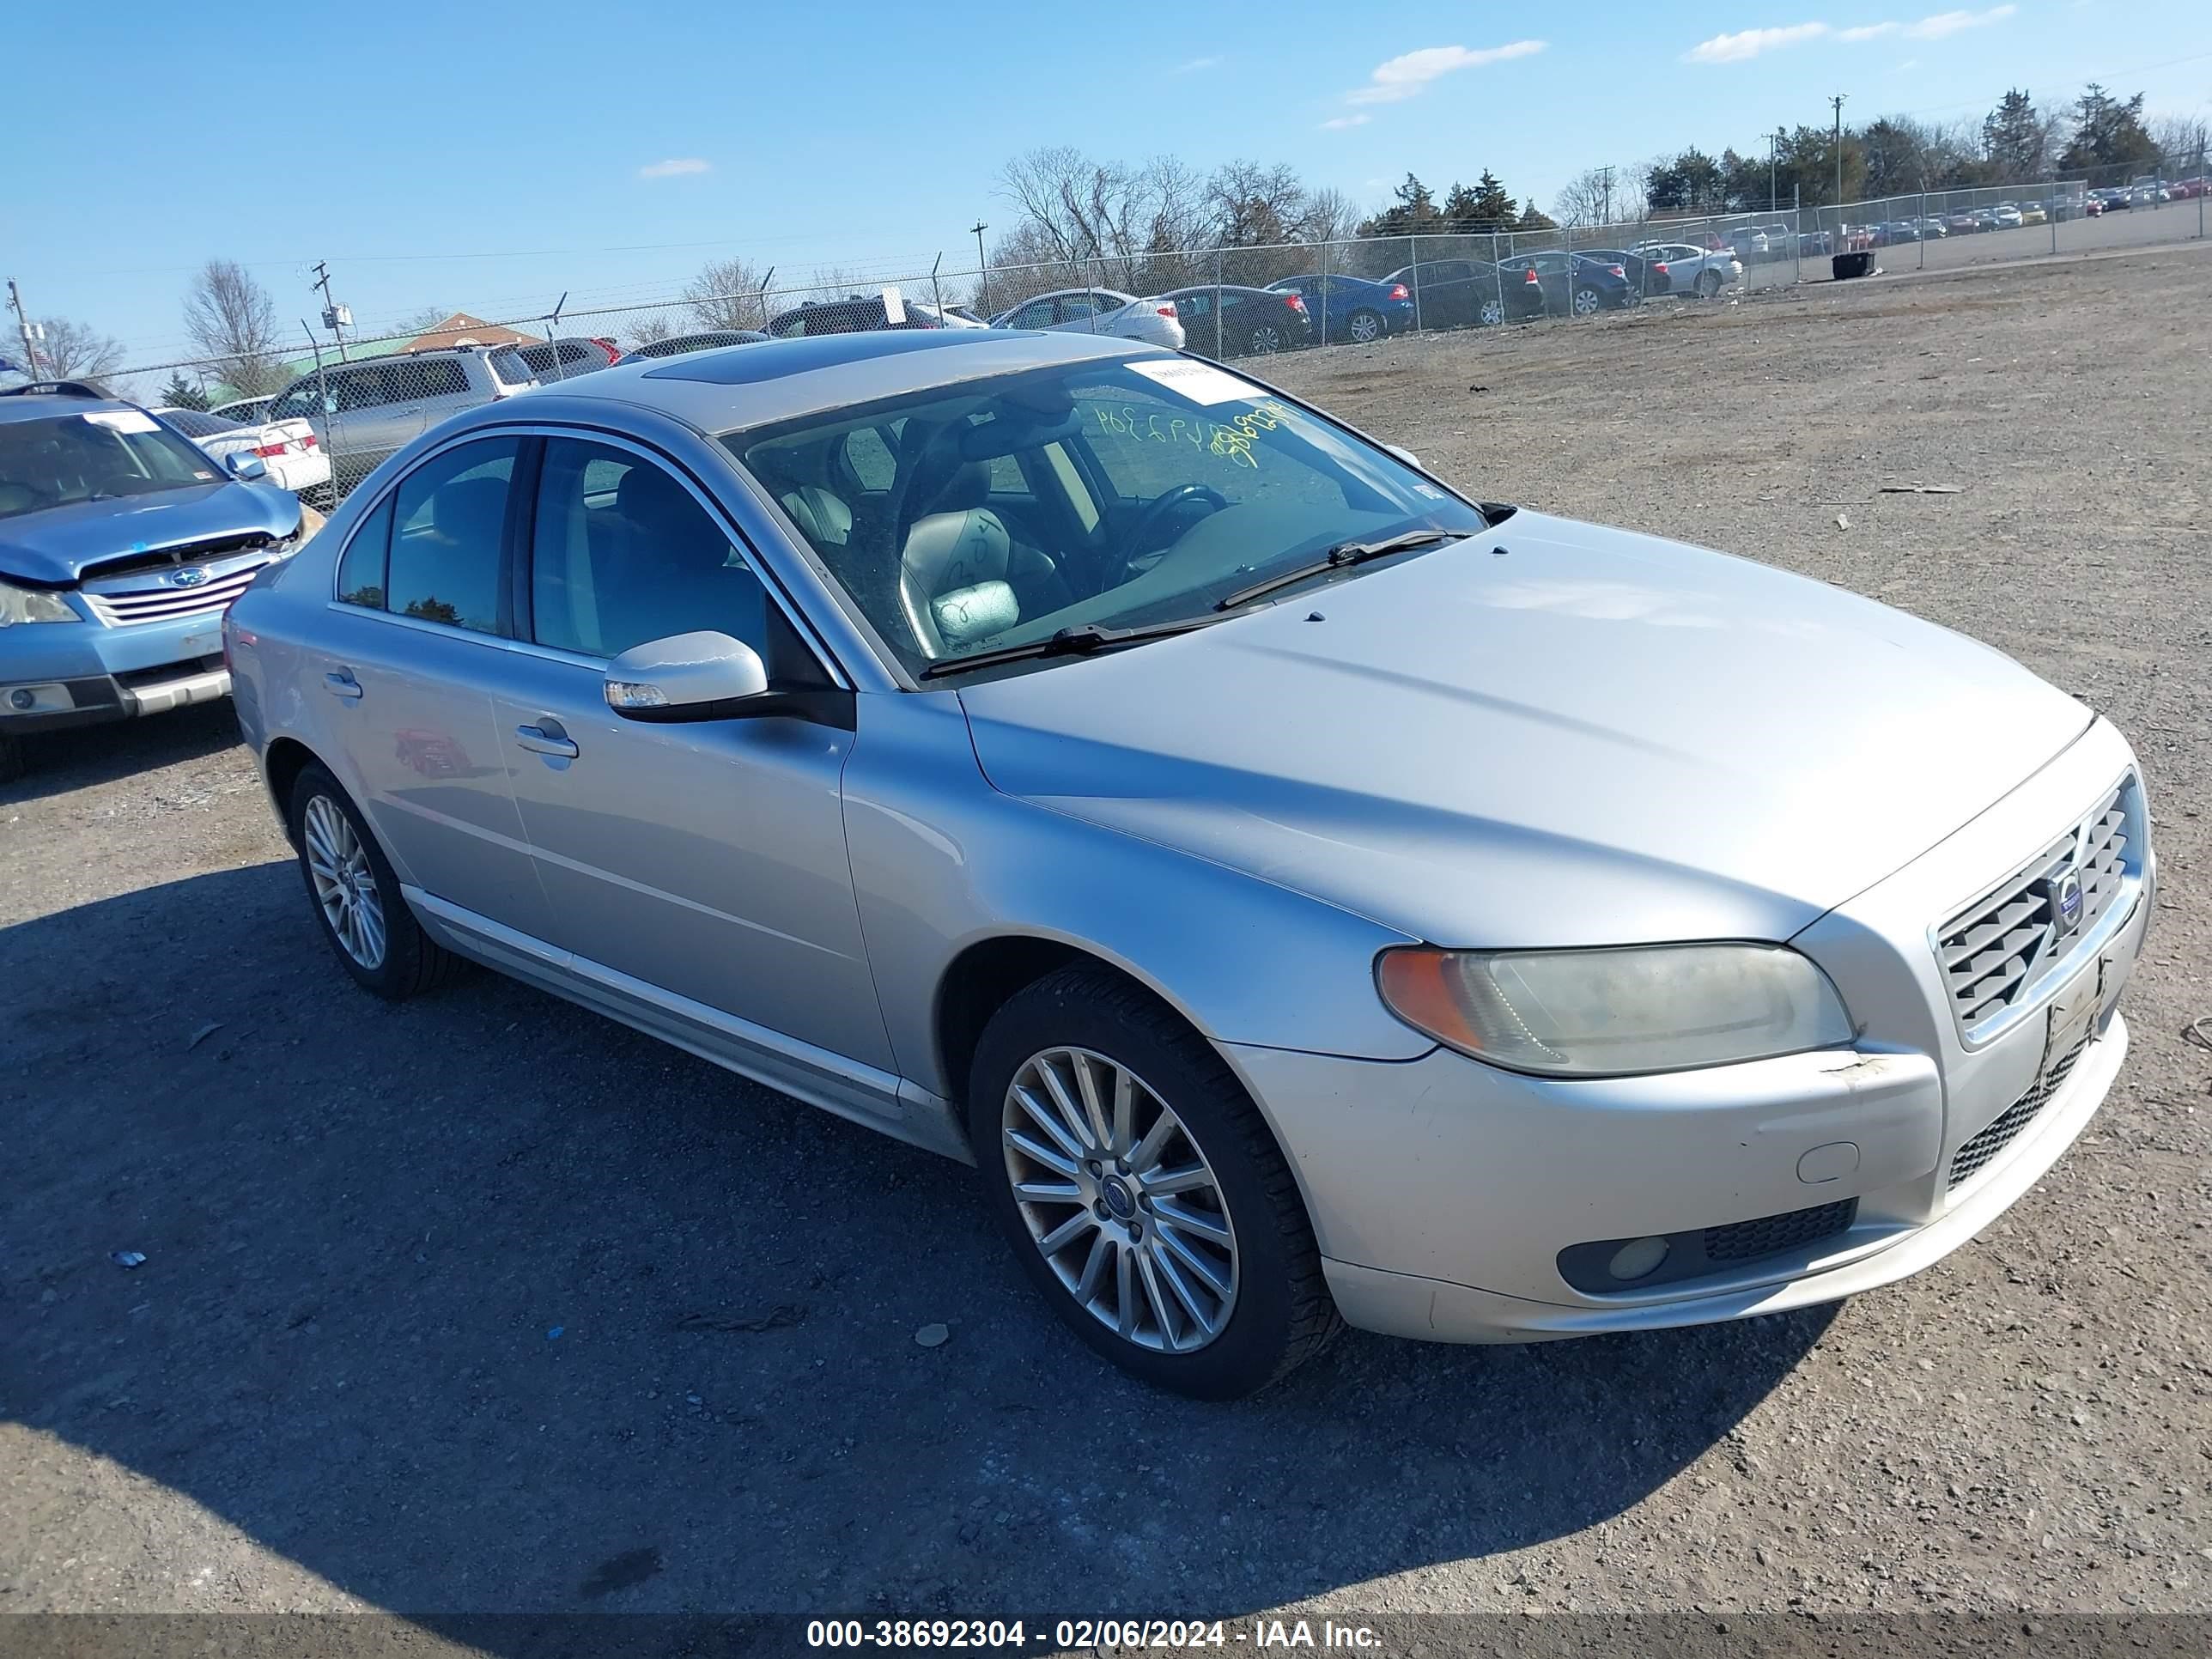 vin: YV1AS982681057652 YV1AS982681057652 2008 volvo s80 3200 for Sale in 22701, 15201 Review Rd, Culpeper, USA